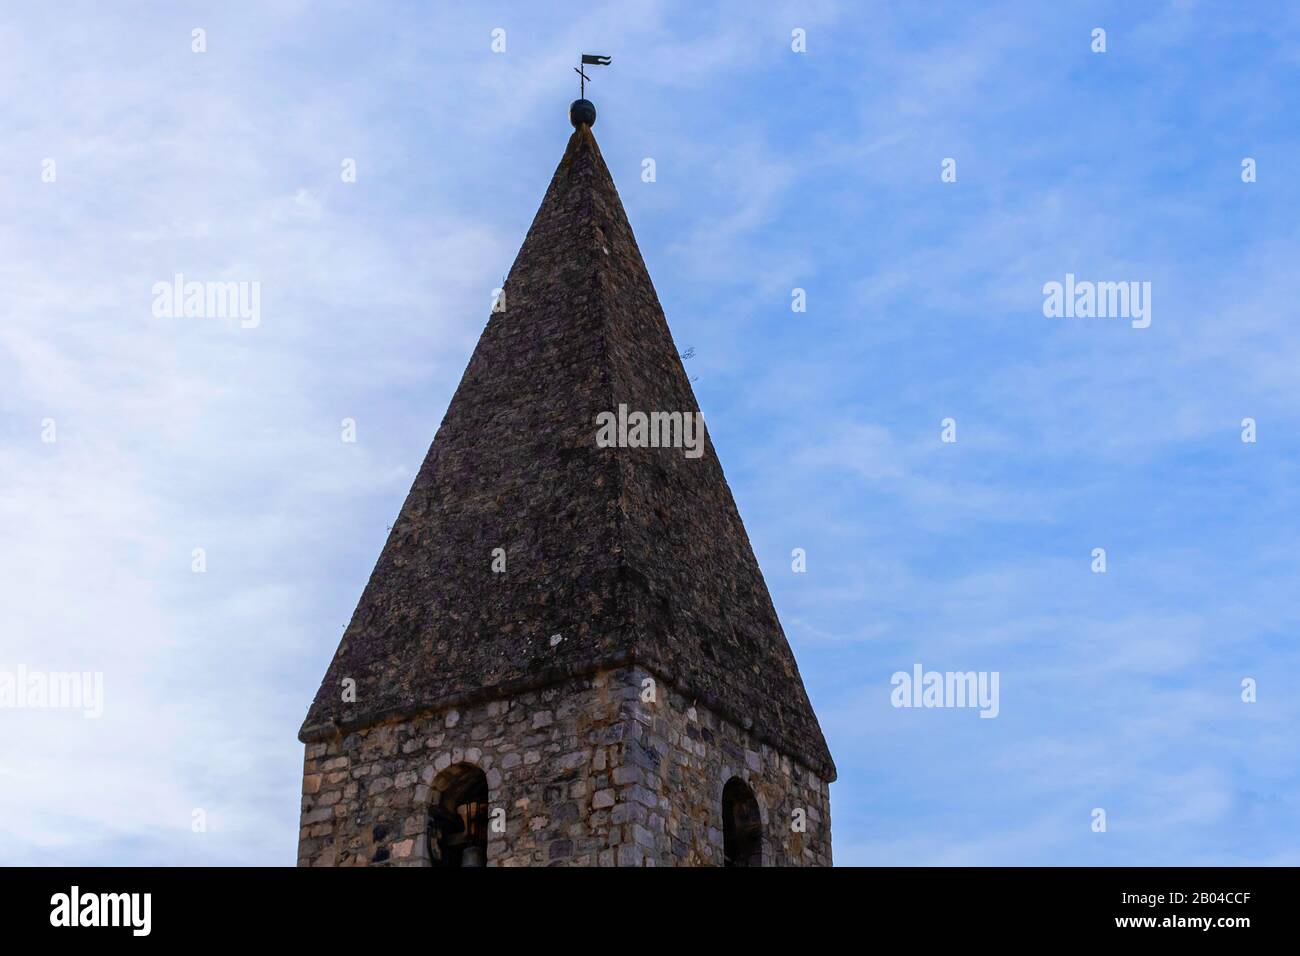 The tower of a European church in a small French village against the background of clear blue sky (Guillaumes, France) Stock Photo